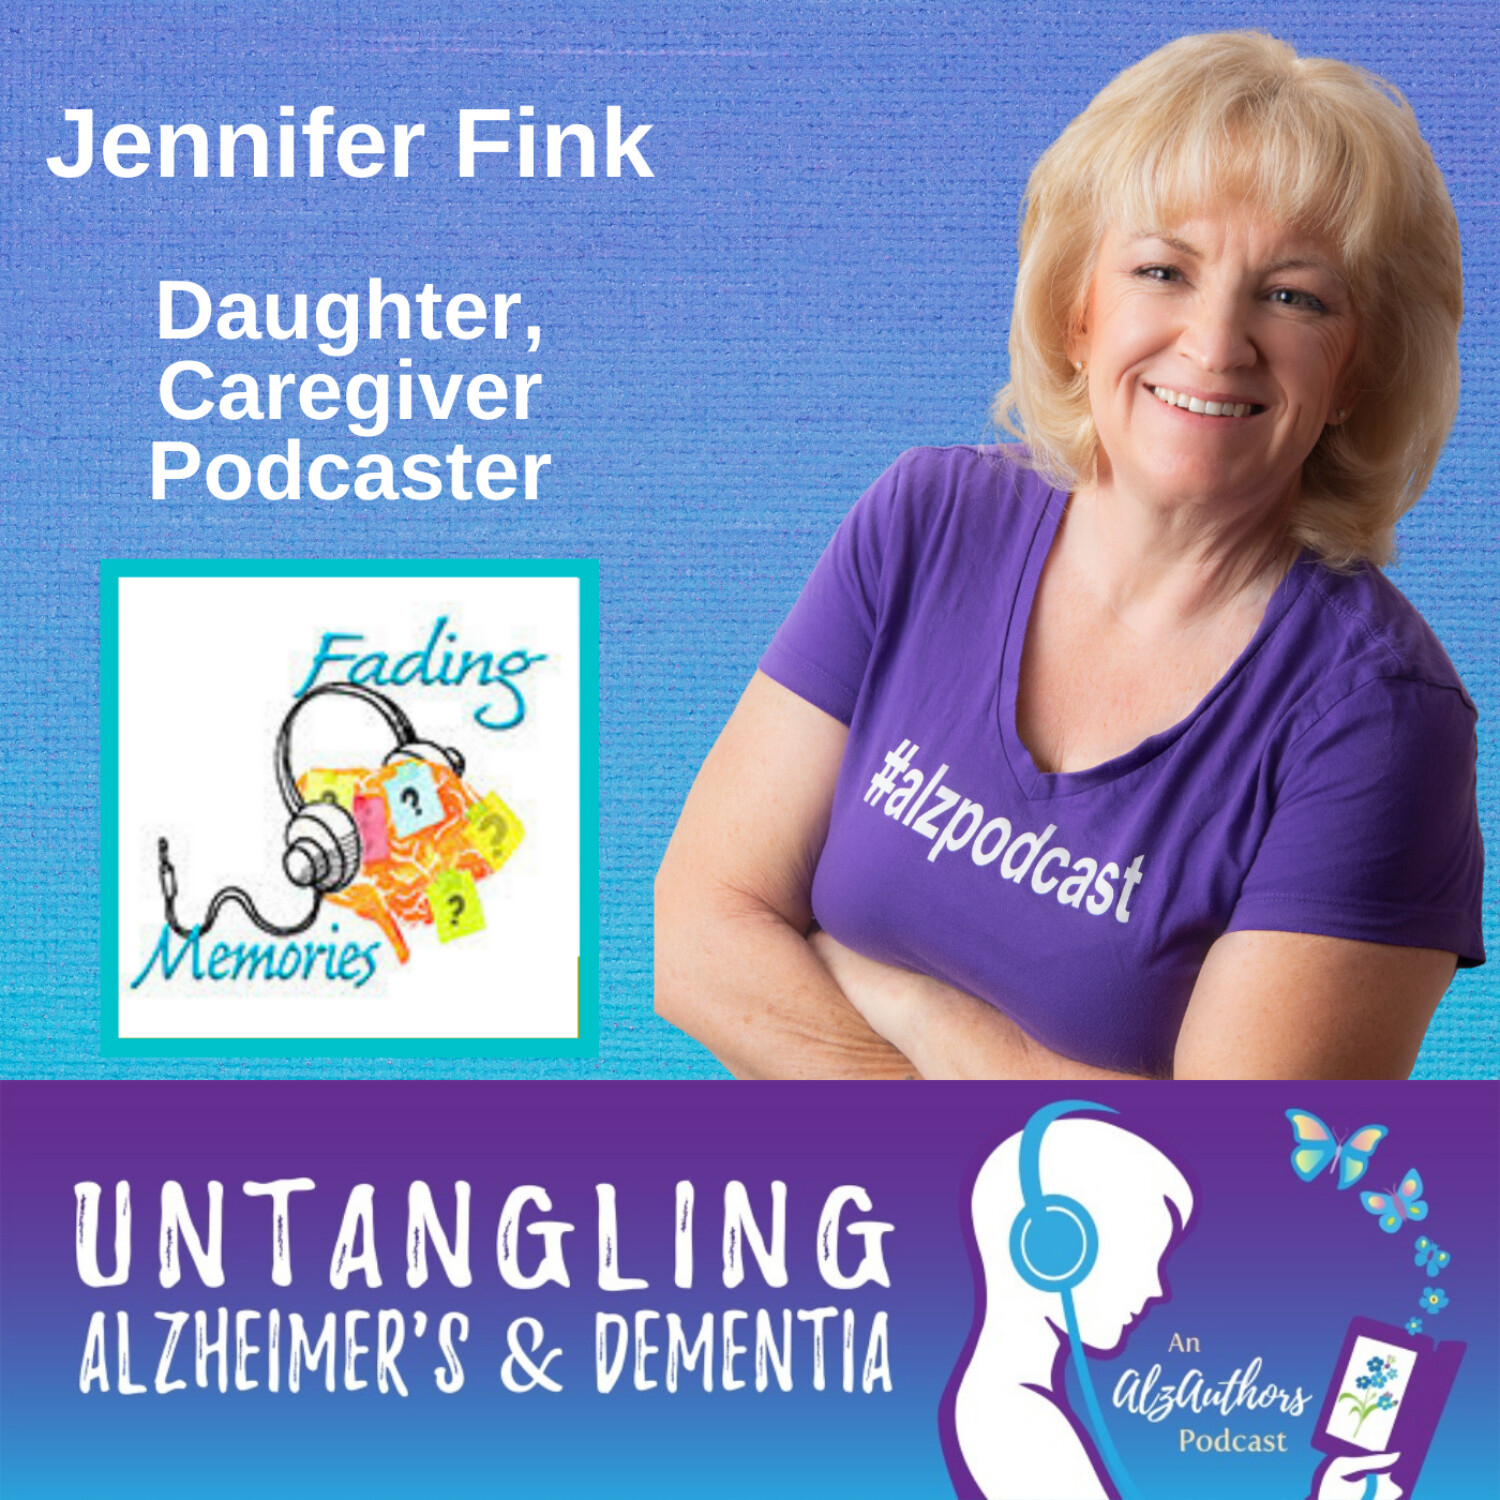 Jennifer Fink Untangles Podcasts, an Essential Tool for Dementia Caregivers